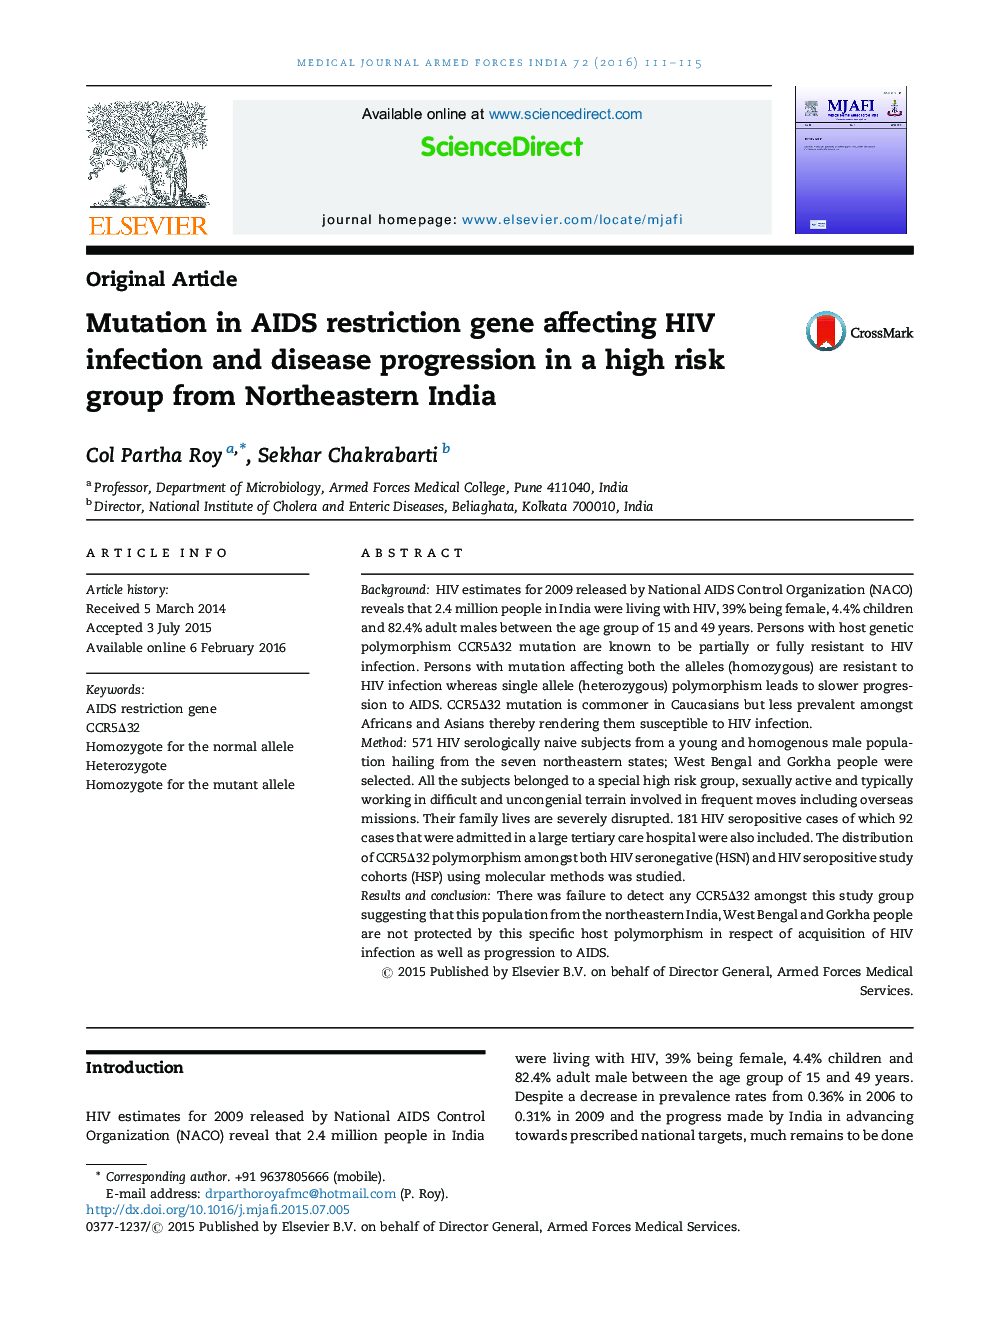 Mutation in AIDS restriction gene affecting HIV infection and disease progression in a high risk group from Northeastern India